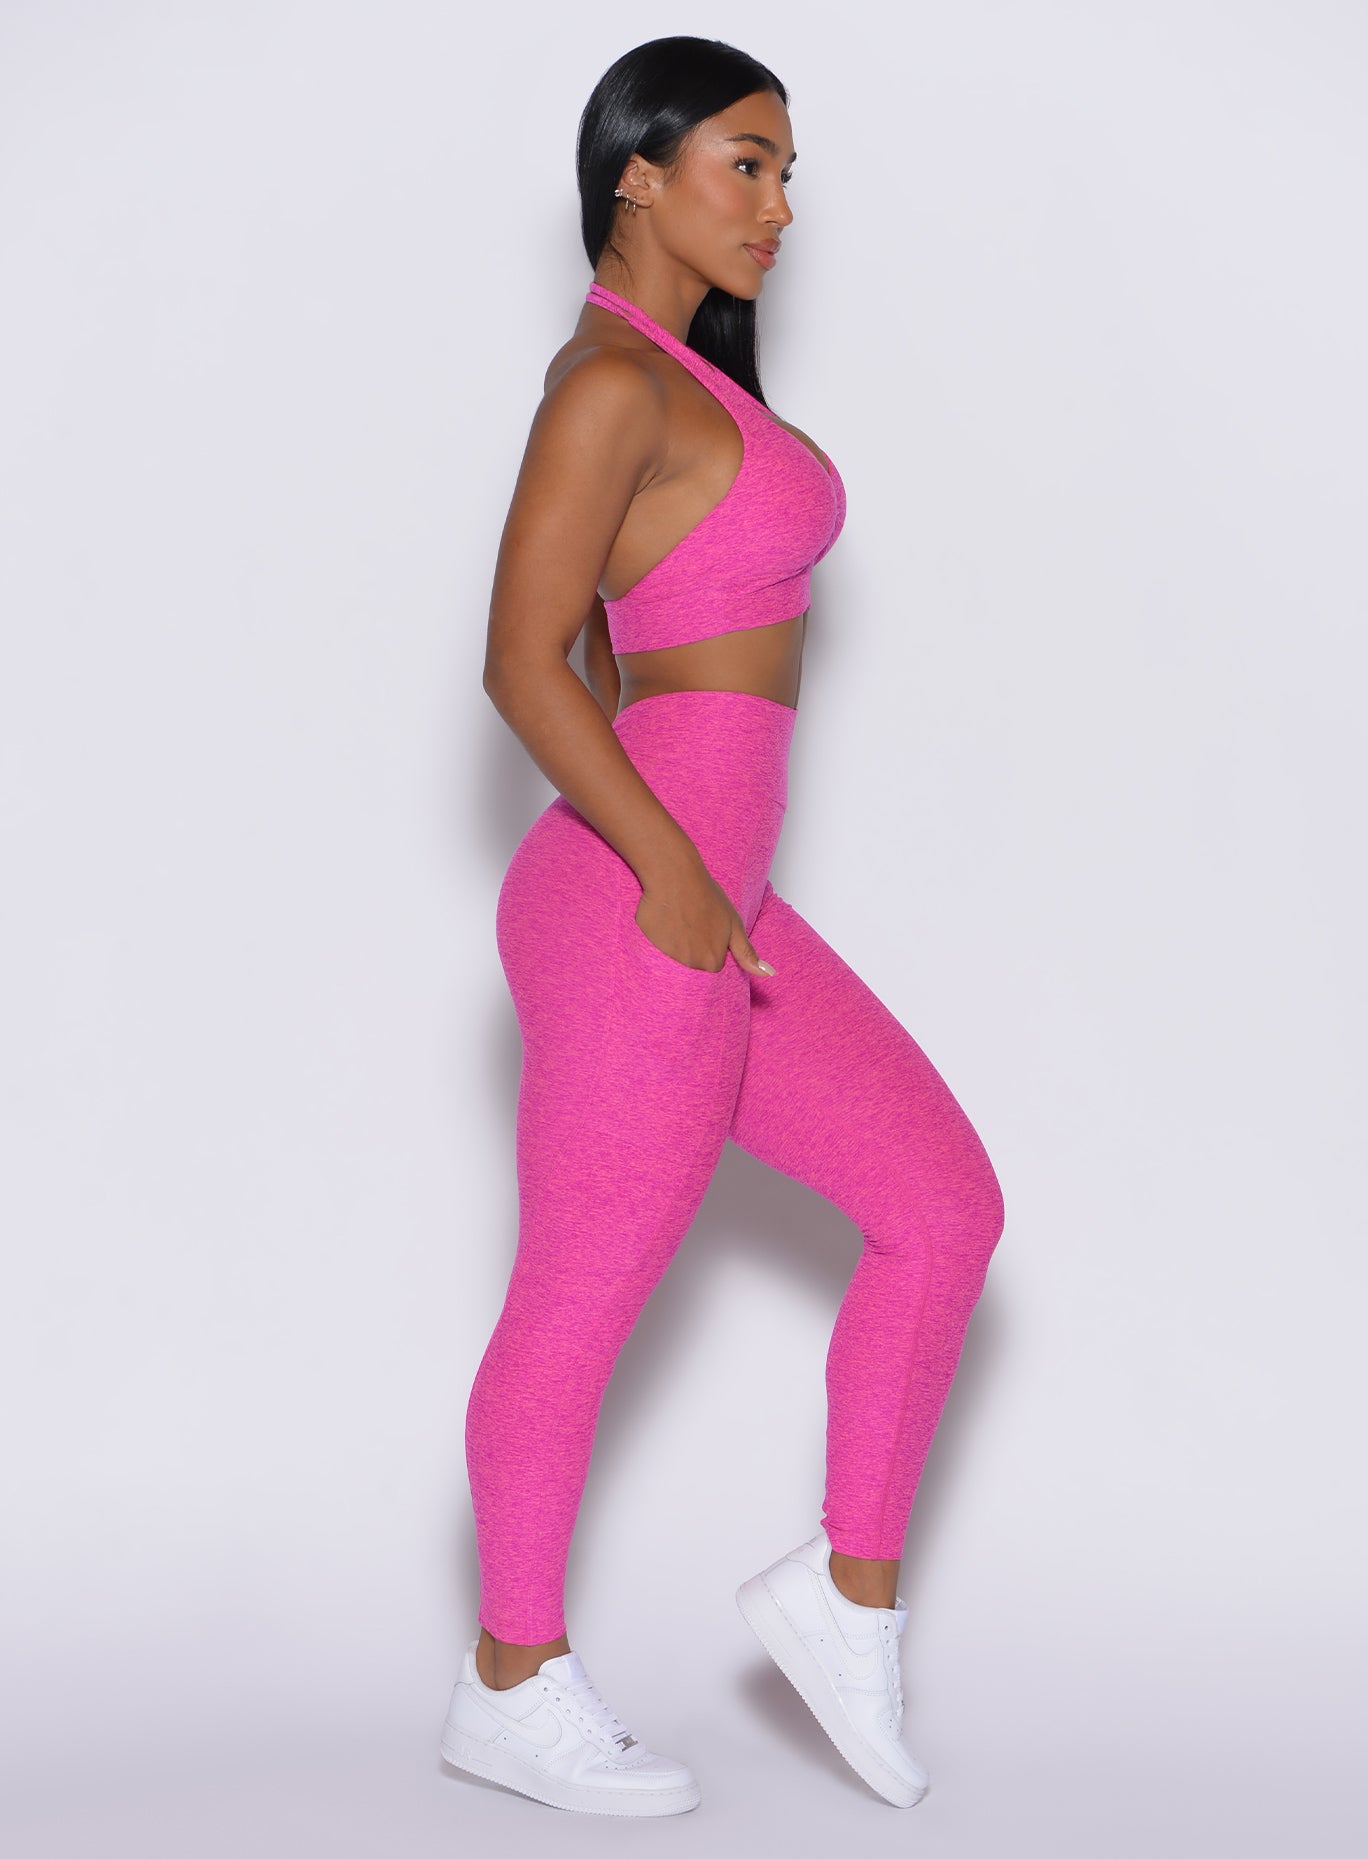 right side profile picture of a model wearing our V back leggings in Neon pink sorbet color along with a matching bra